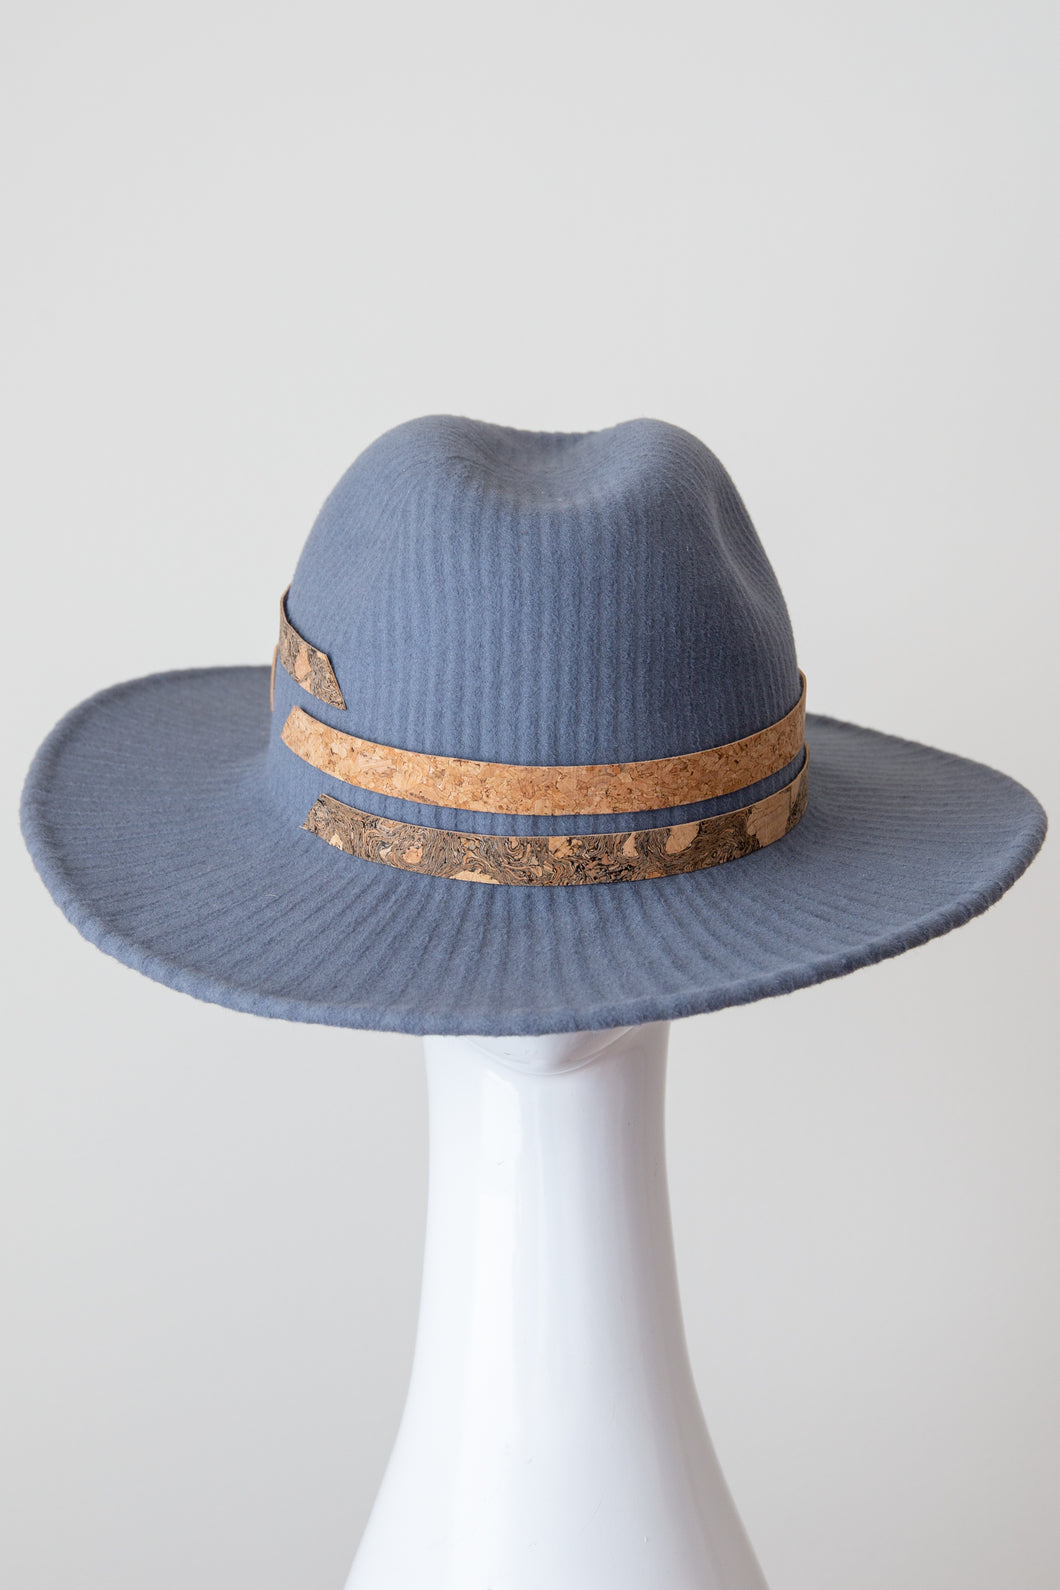 The Grey and Natural Fedora by Felicity Northeast Millinery